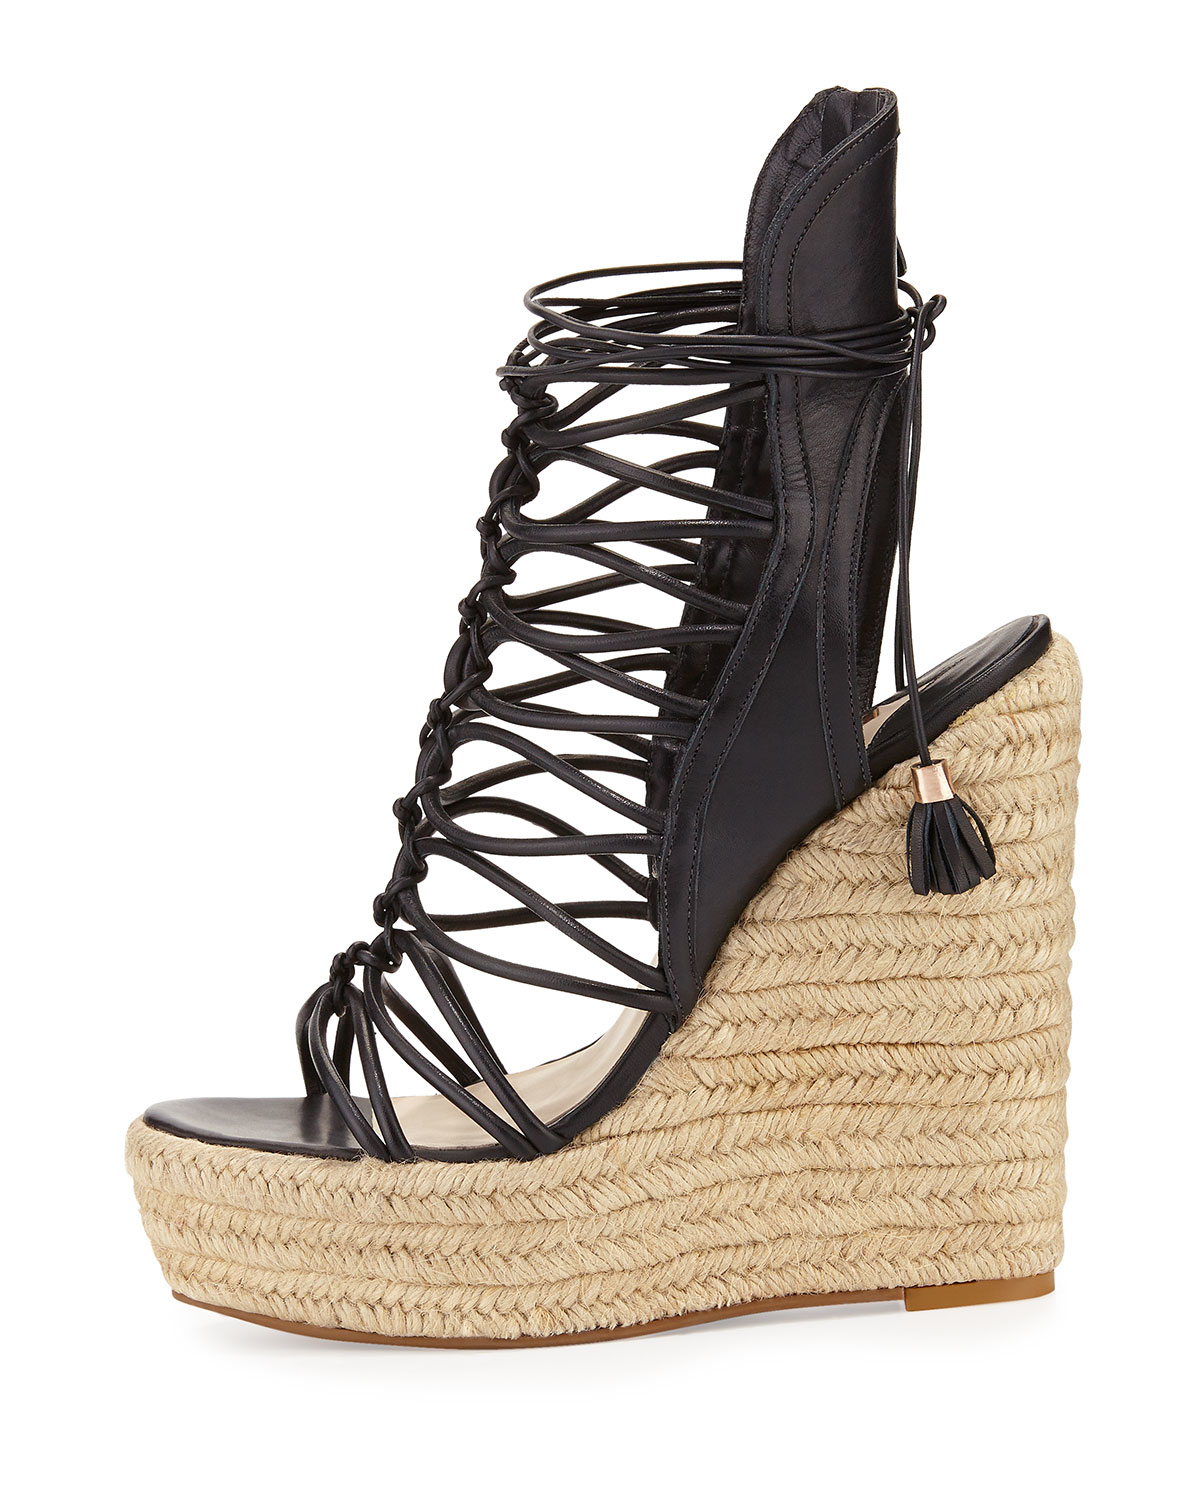 Lyst - Sophia Webster Lacey Lace-up Gladiator Wedge Sandal in Black